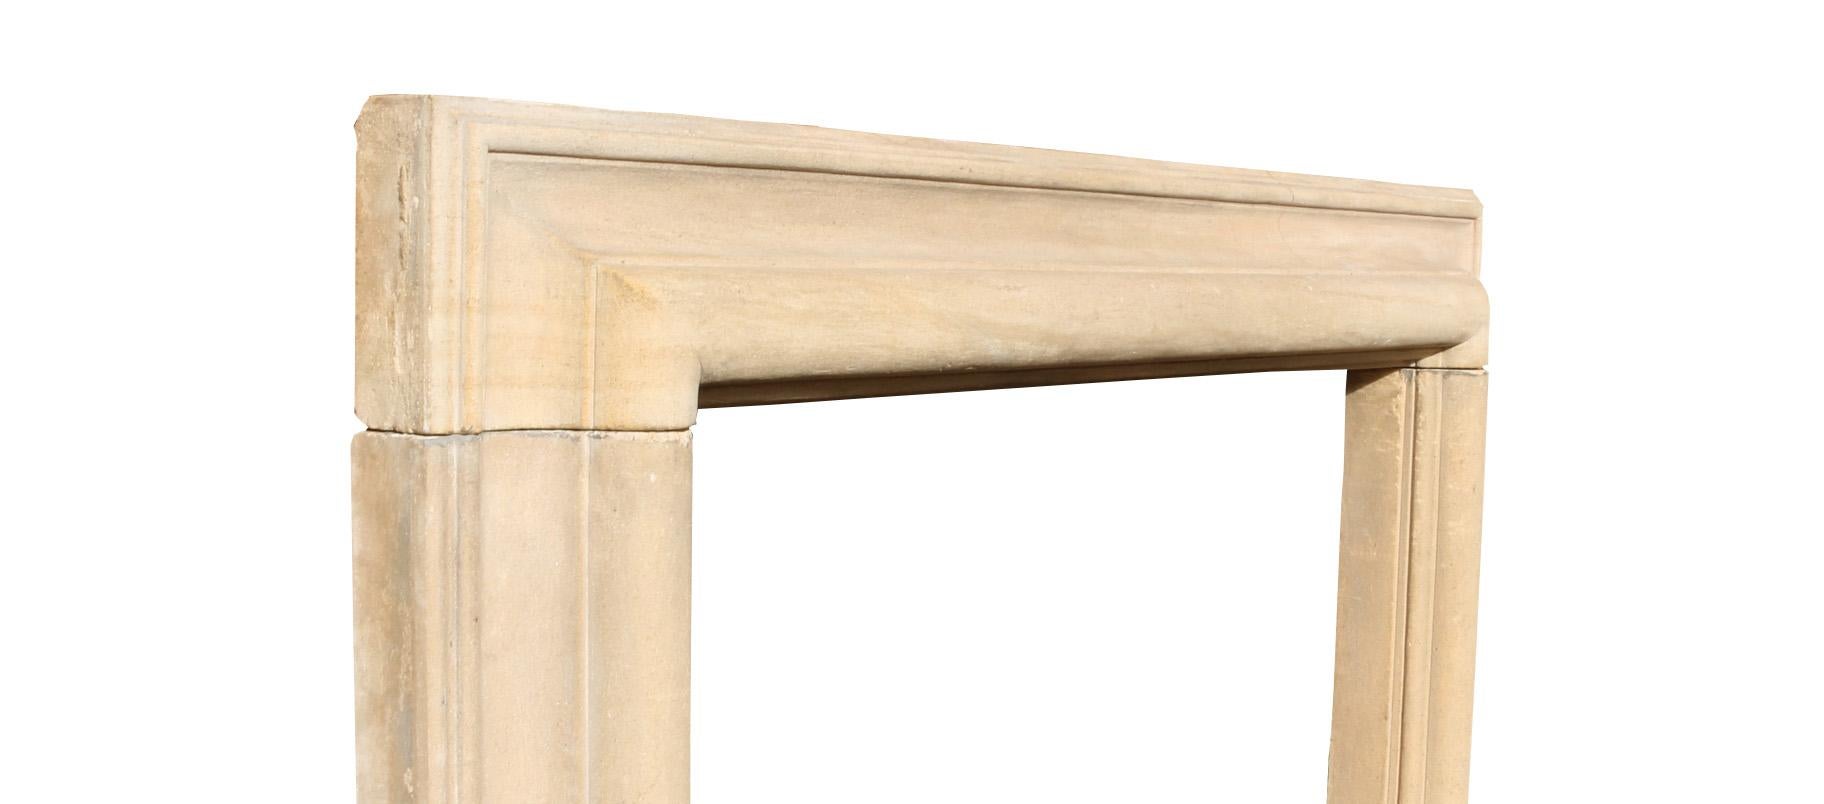 George III Limestone Bolection Fire Mantel In Good Condition For Sale In Wormelow, Herefordshire